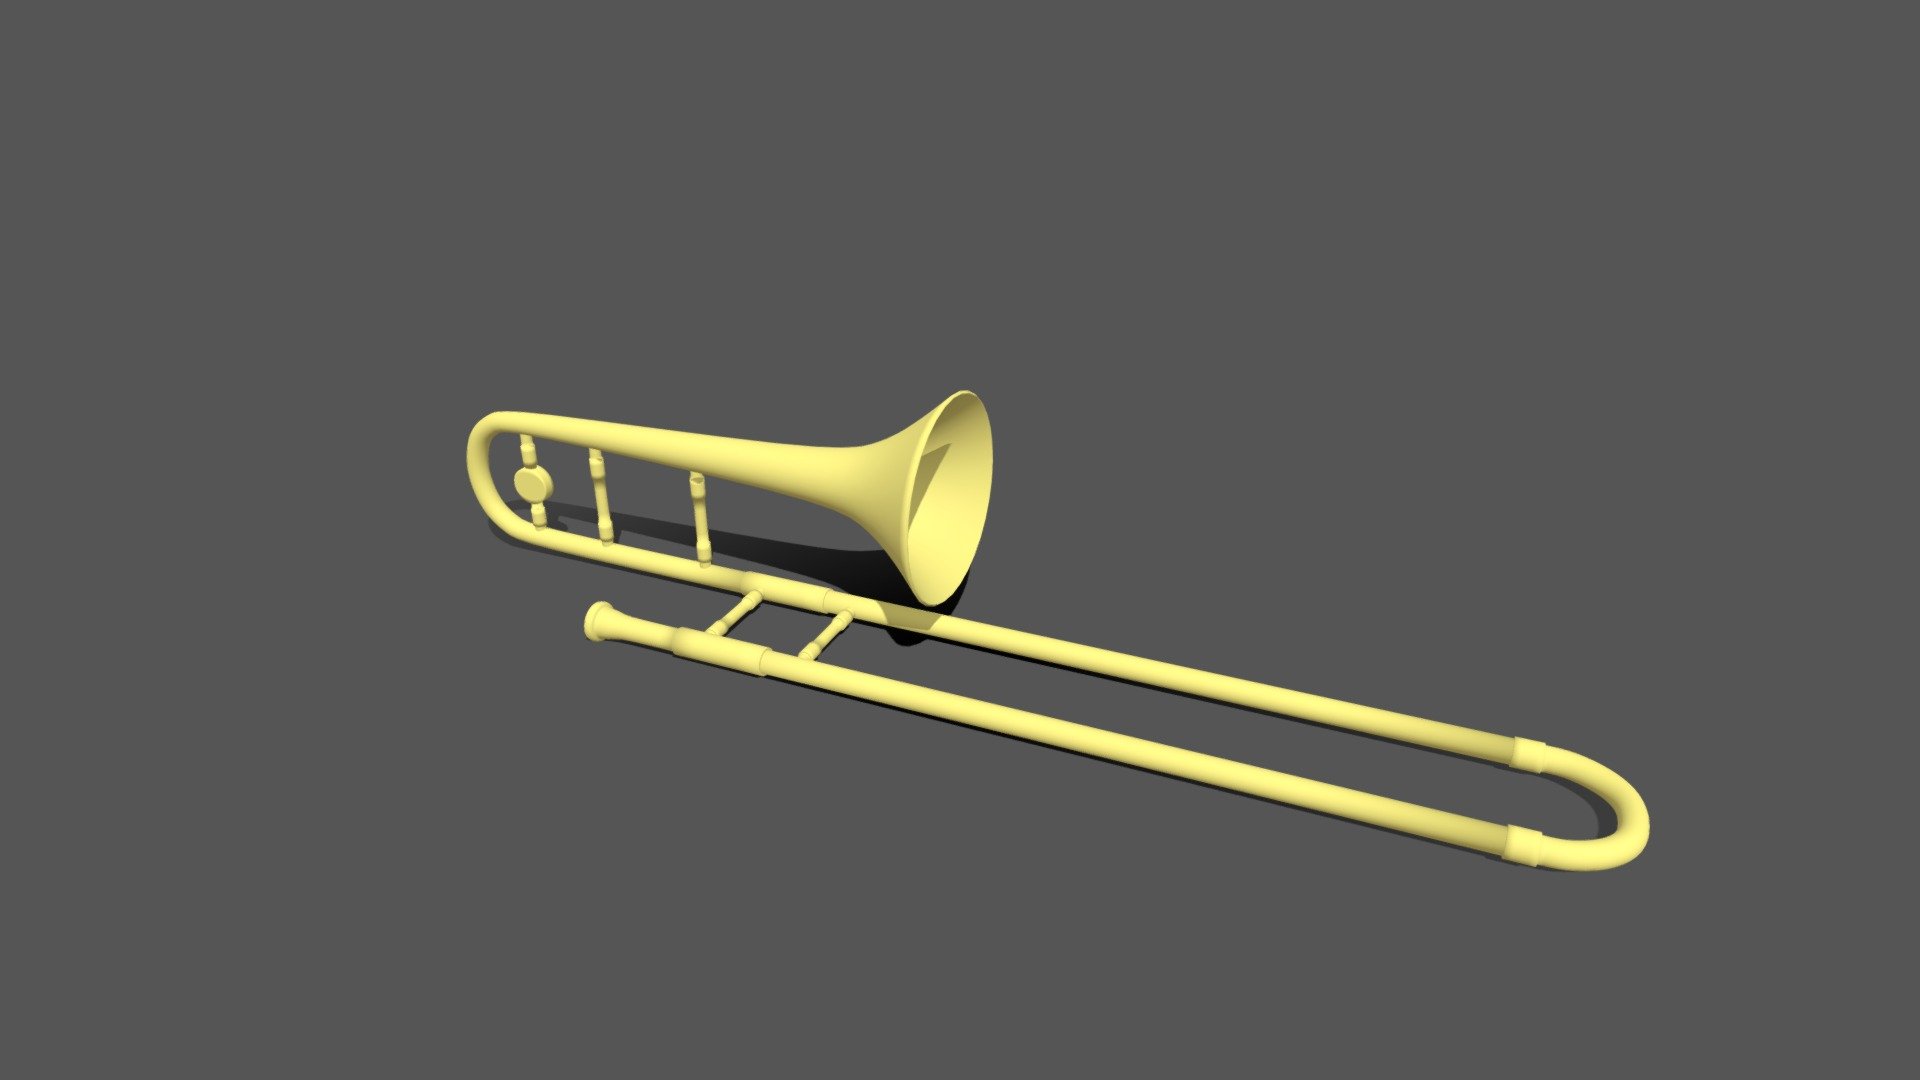 This is a 3d model of a trombone. The trombone was modeled and prepared for cartoon style renderings, background, general CG visualization etc presented as a mesh with quads only.

Verts : 24.130 Faces: 23.808

The 3d model have simple materials with diffuse colors.

No ring, maps and no UVW mapping is available.

The original file was created in blender. You will receive a 3DS, OBJ, FBX, blend, DAE, Stl.

All preview images were rendered with Blender Cycles. Product is ready to render out-of-the-box. Please note that the lights, cameras, and background is only included in the .blend file. The model is clean and alone in the other provided files, centred at origin and has real-world scale 3d model